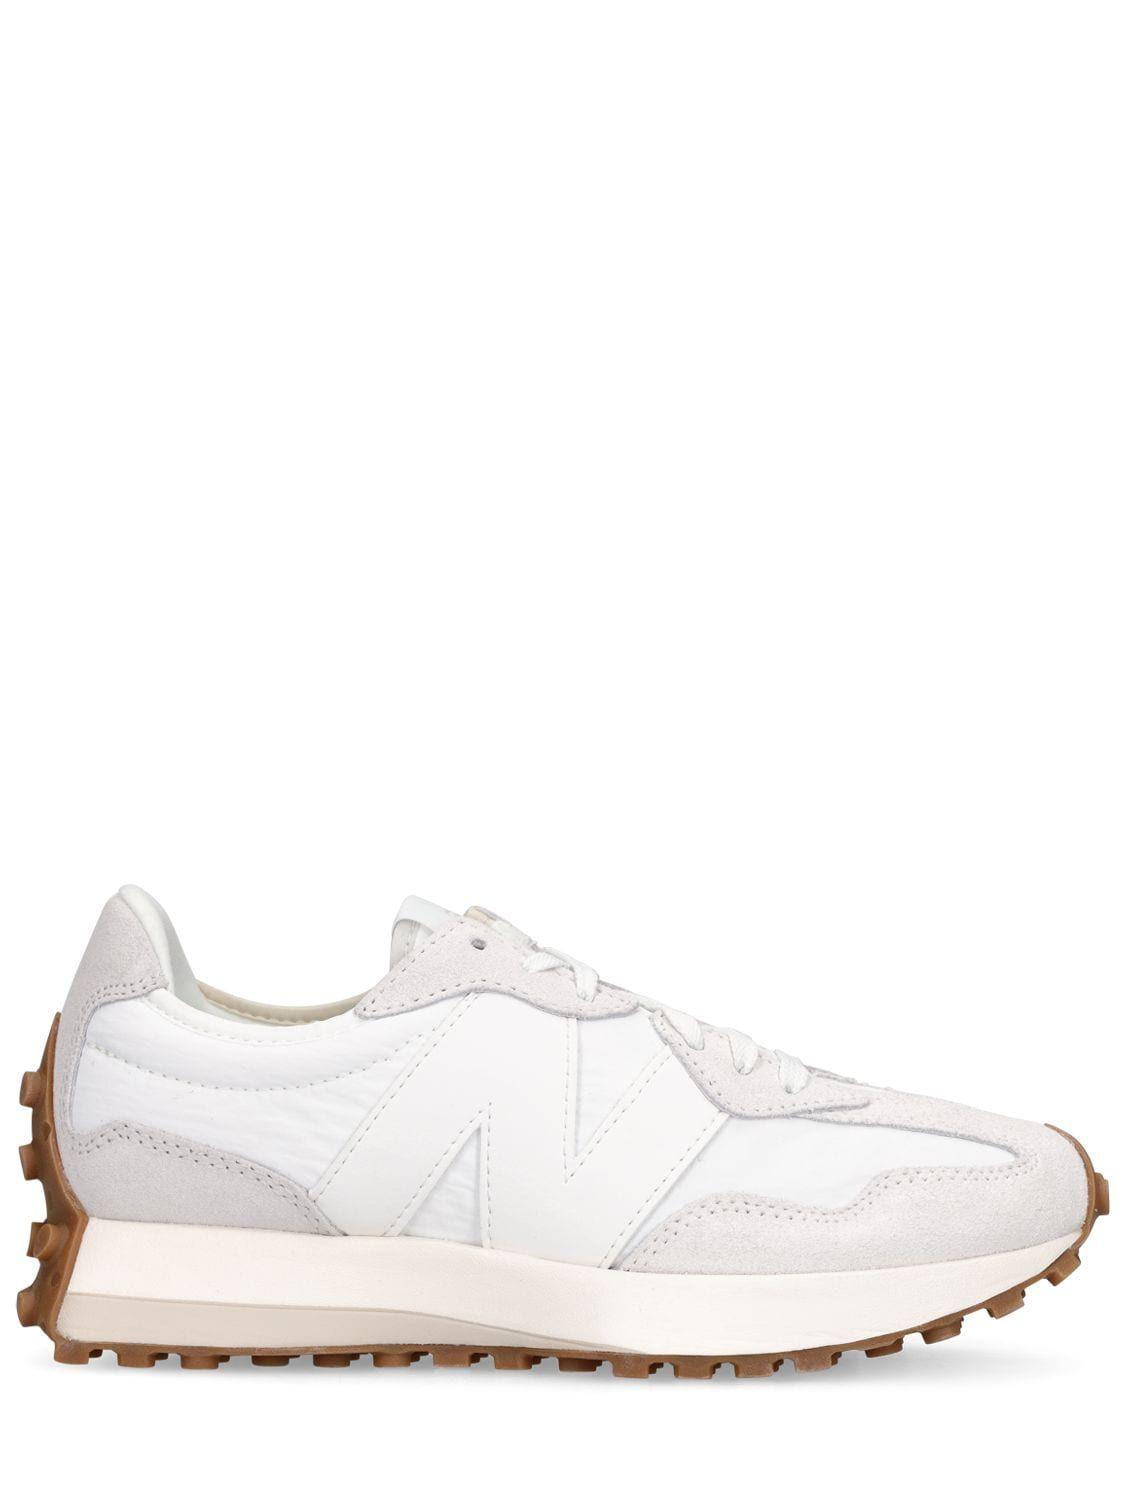 New Balance 327 Sneakers in White | Lyst